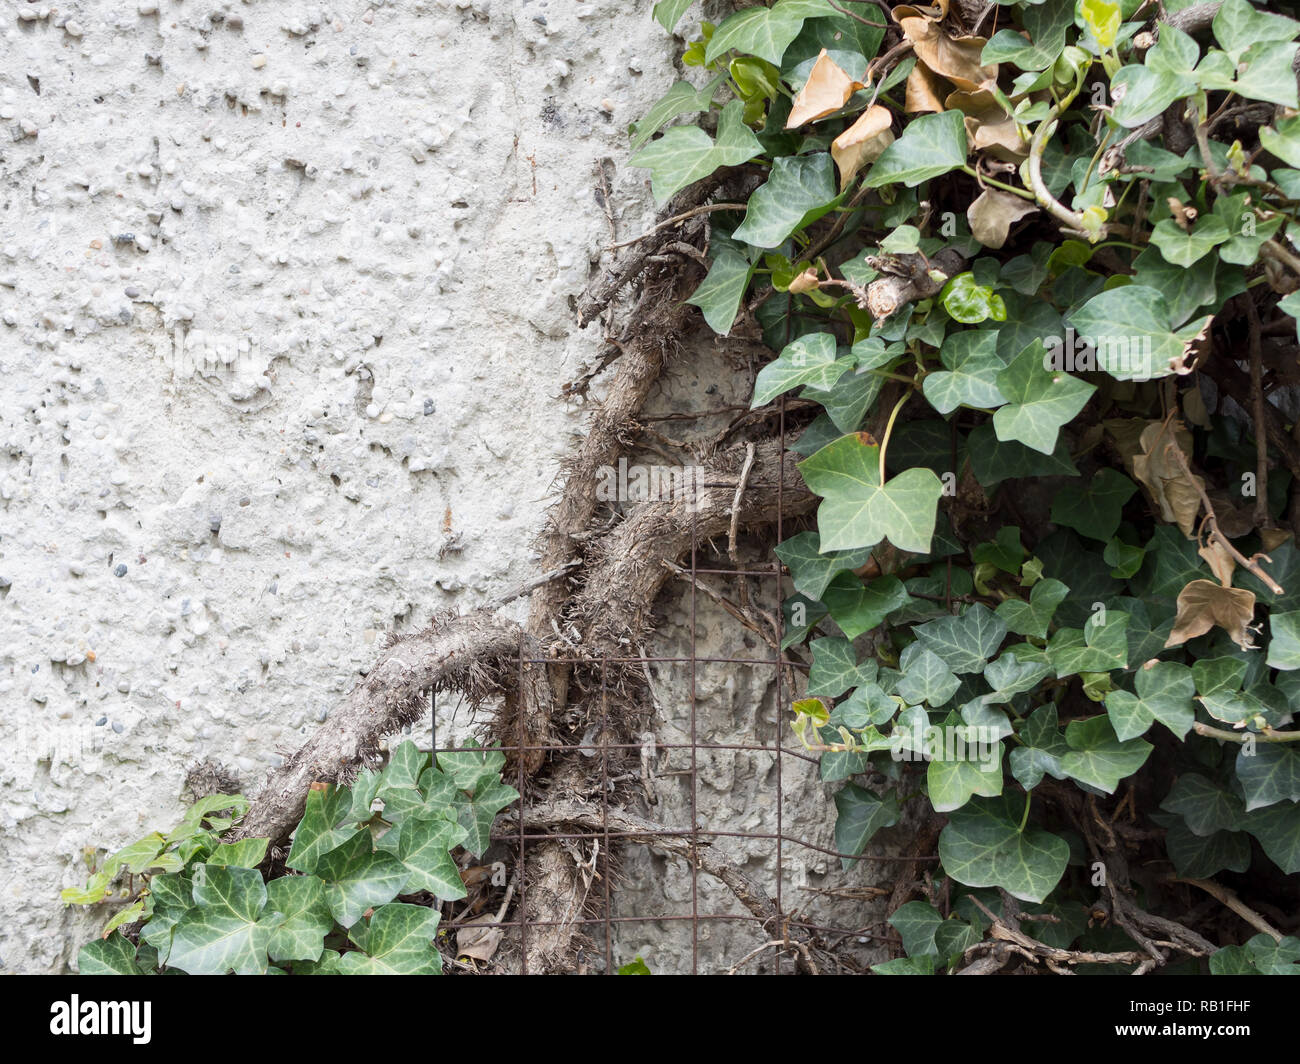 Leaves of European Ivy, Hedera helix, At A Stone Wall With Copy Space Stock Photo